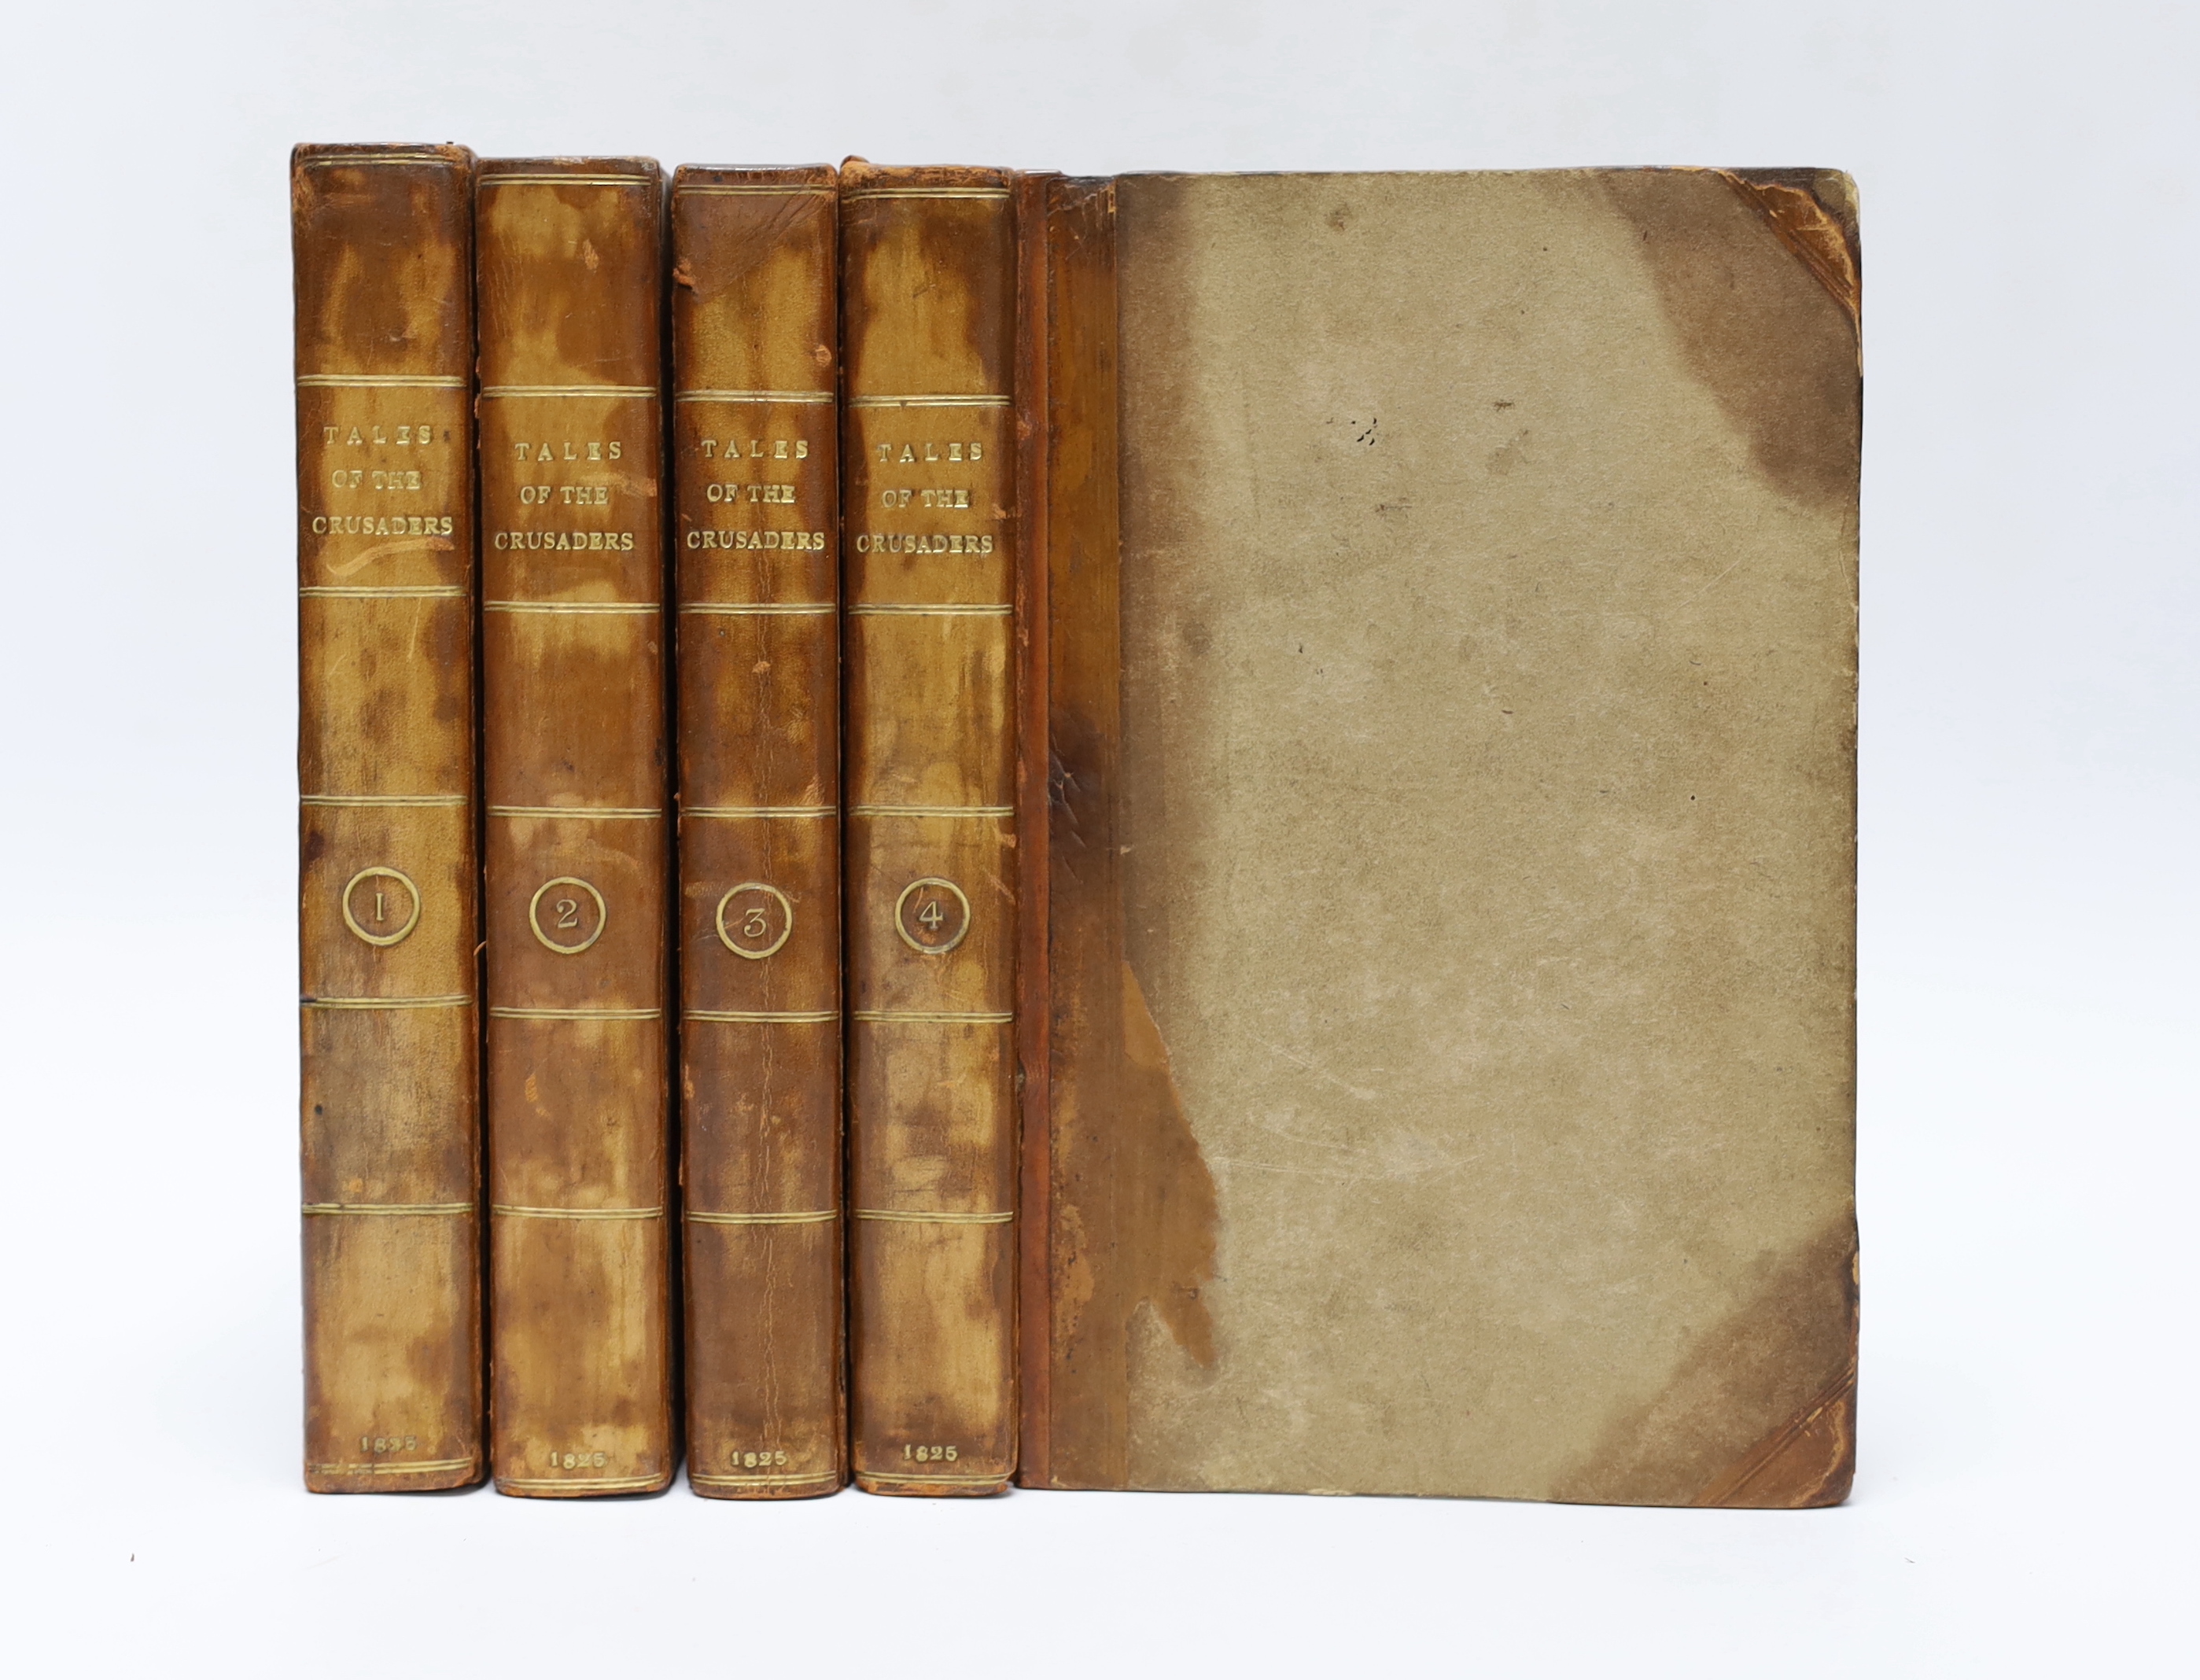 Scott, Sir Walter - Tales of the Crusaders, 1st edition, 4 vols, 8vo, half calf rebacked, half titles to each vol., 4p. publisher’s catalogue at end of vol. 4, Archibald Constable, Edinburgh, 1825